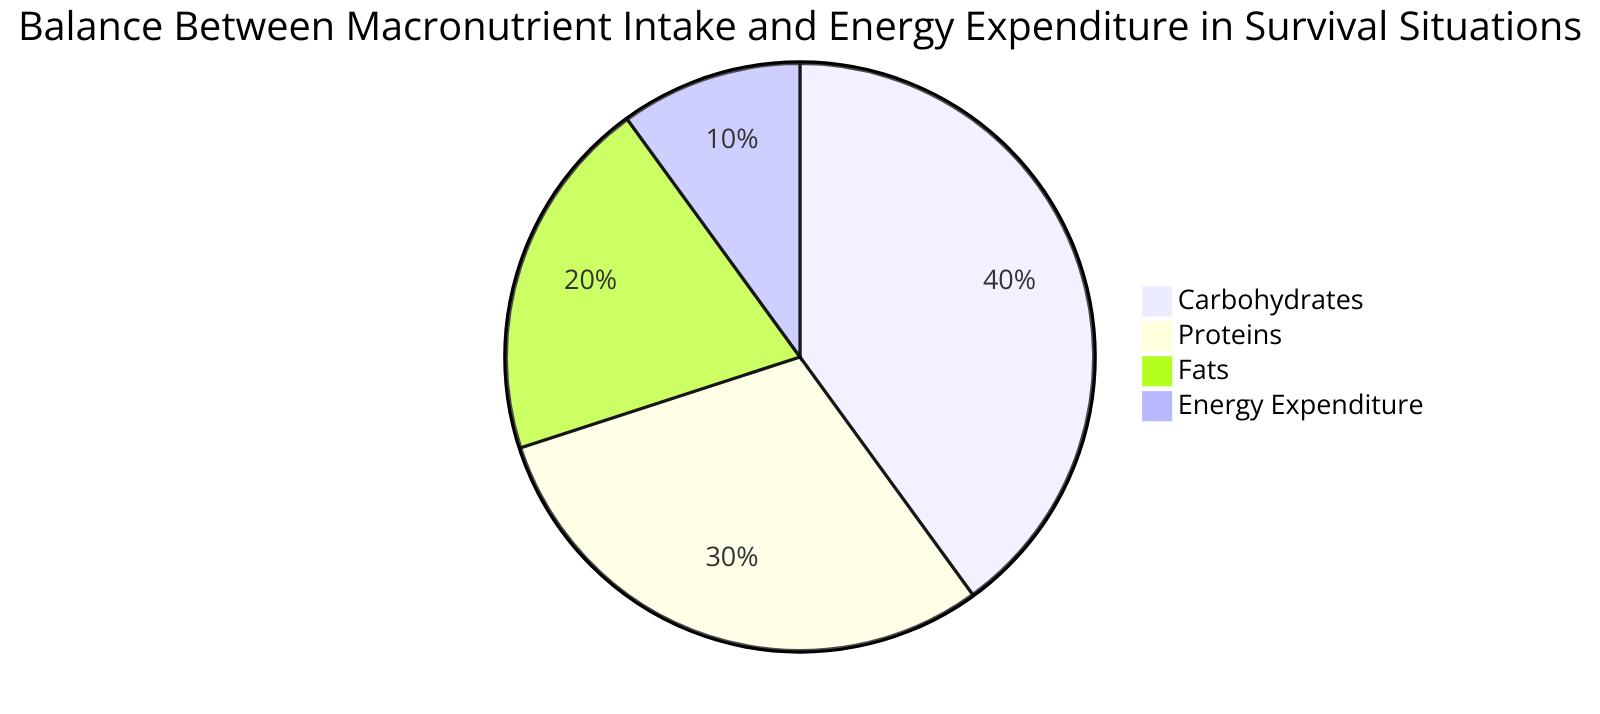 the balance between macronutrient intake and energy expenditure in survival situations